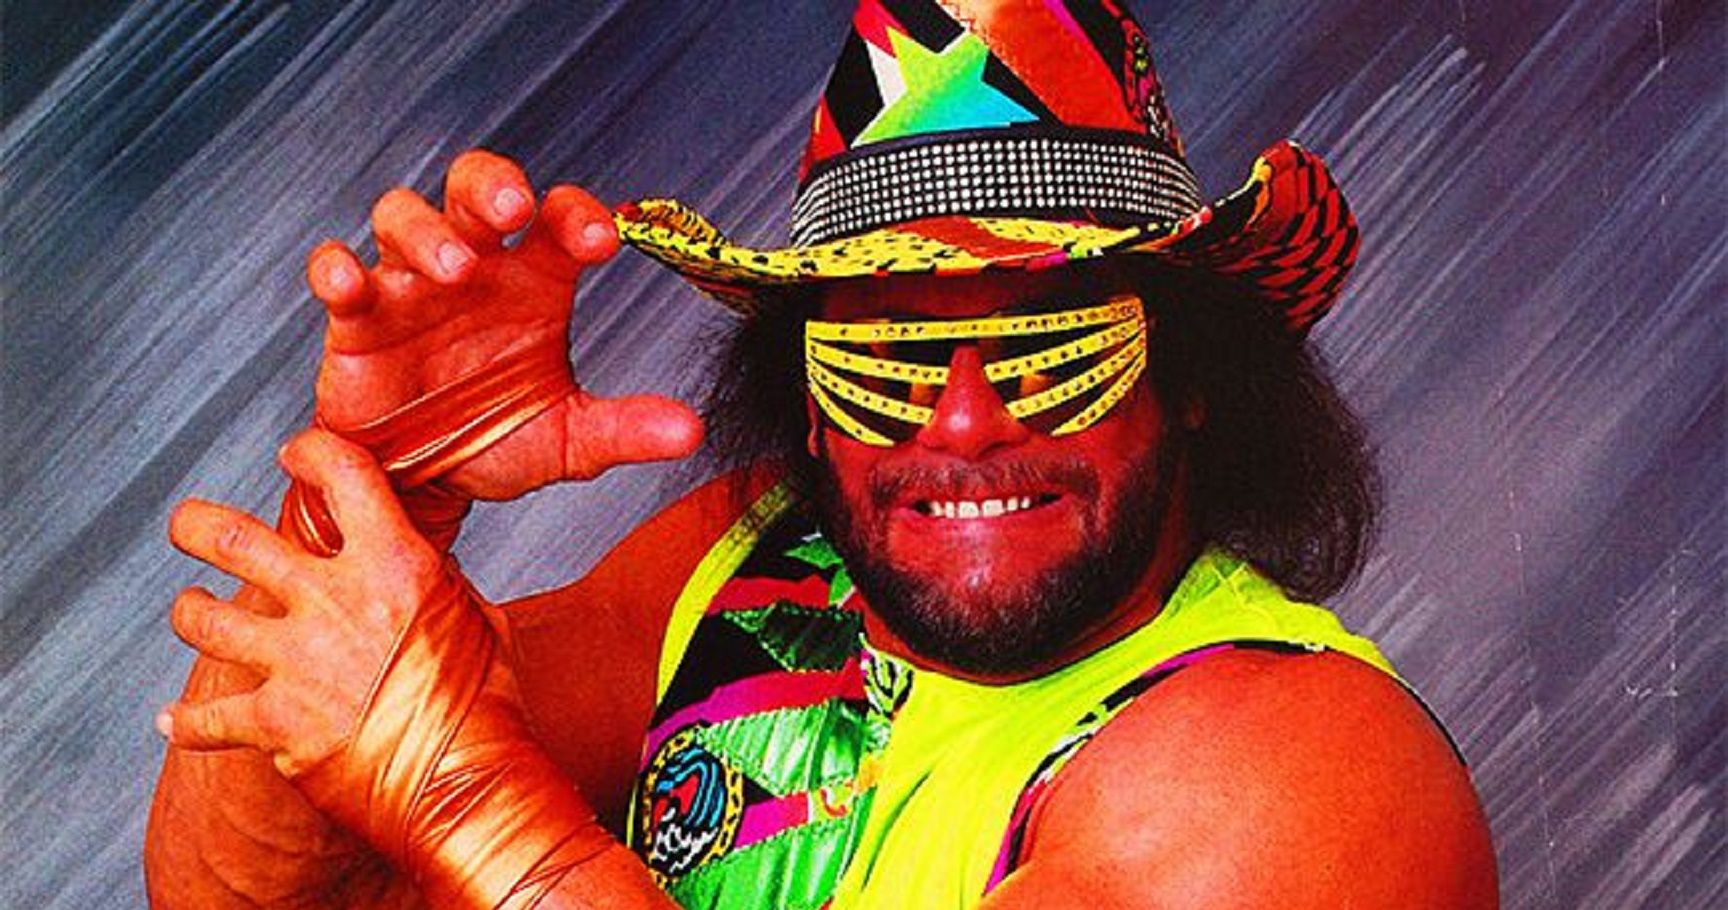 ...The Macho Man" Randy Savage, may he rest in peace. 